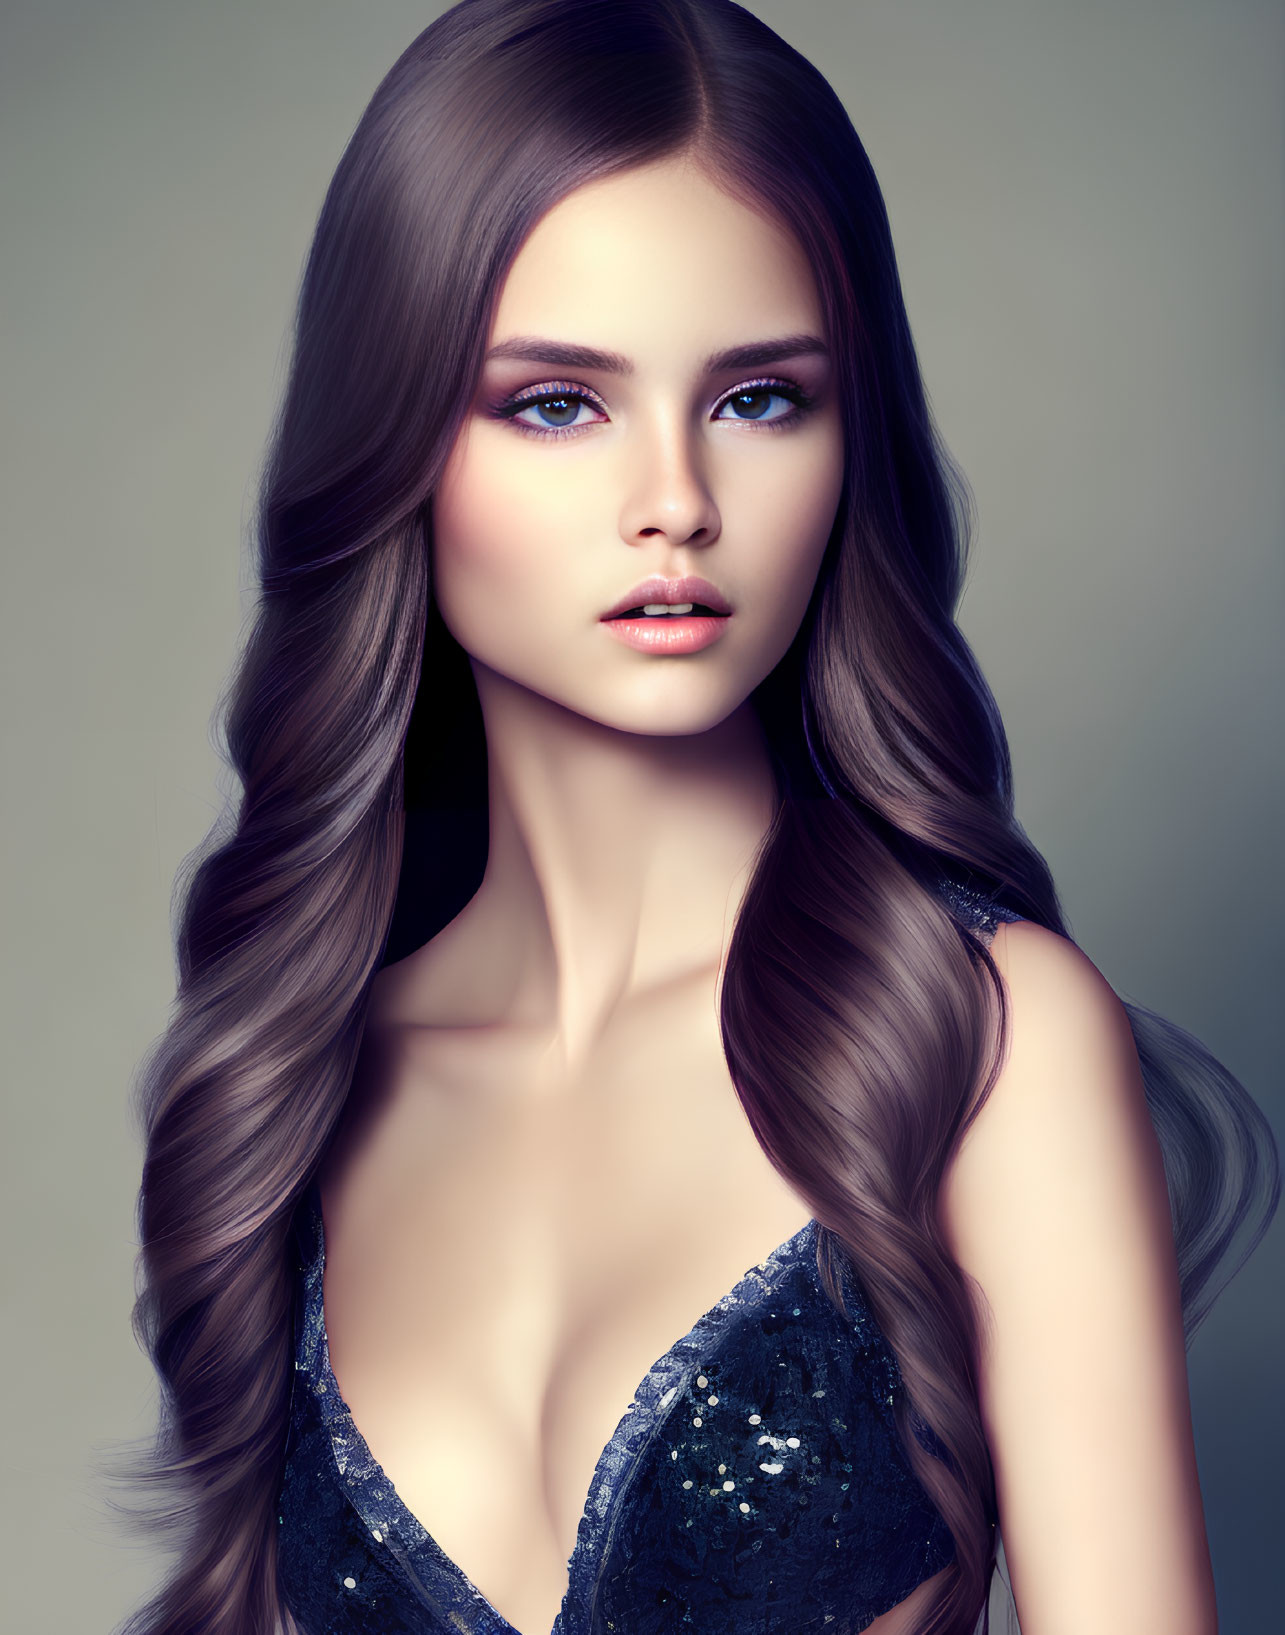 Woman with Long Wavy Brown Hair and Blue Eyes in Sequined Top on Neutral Background